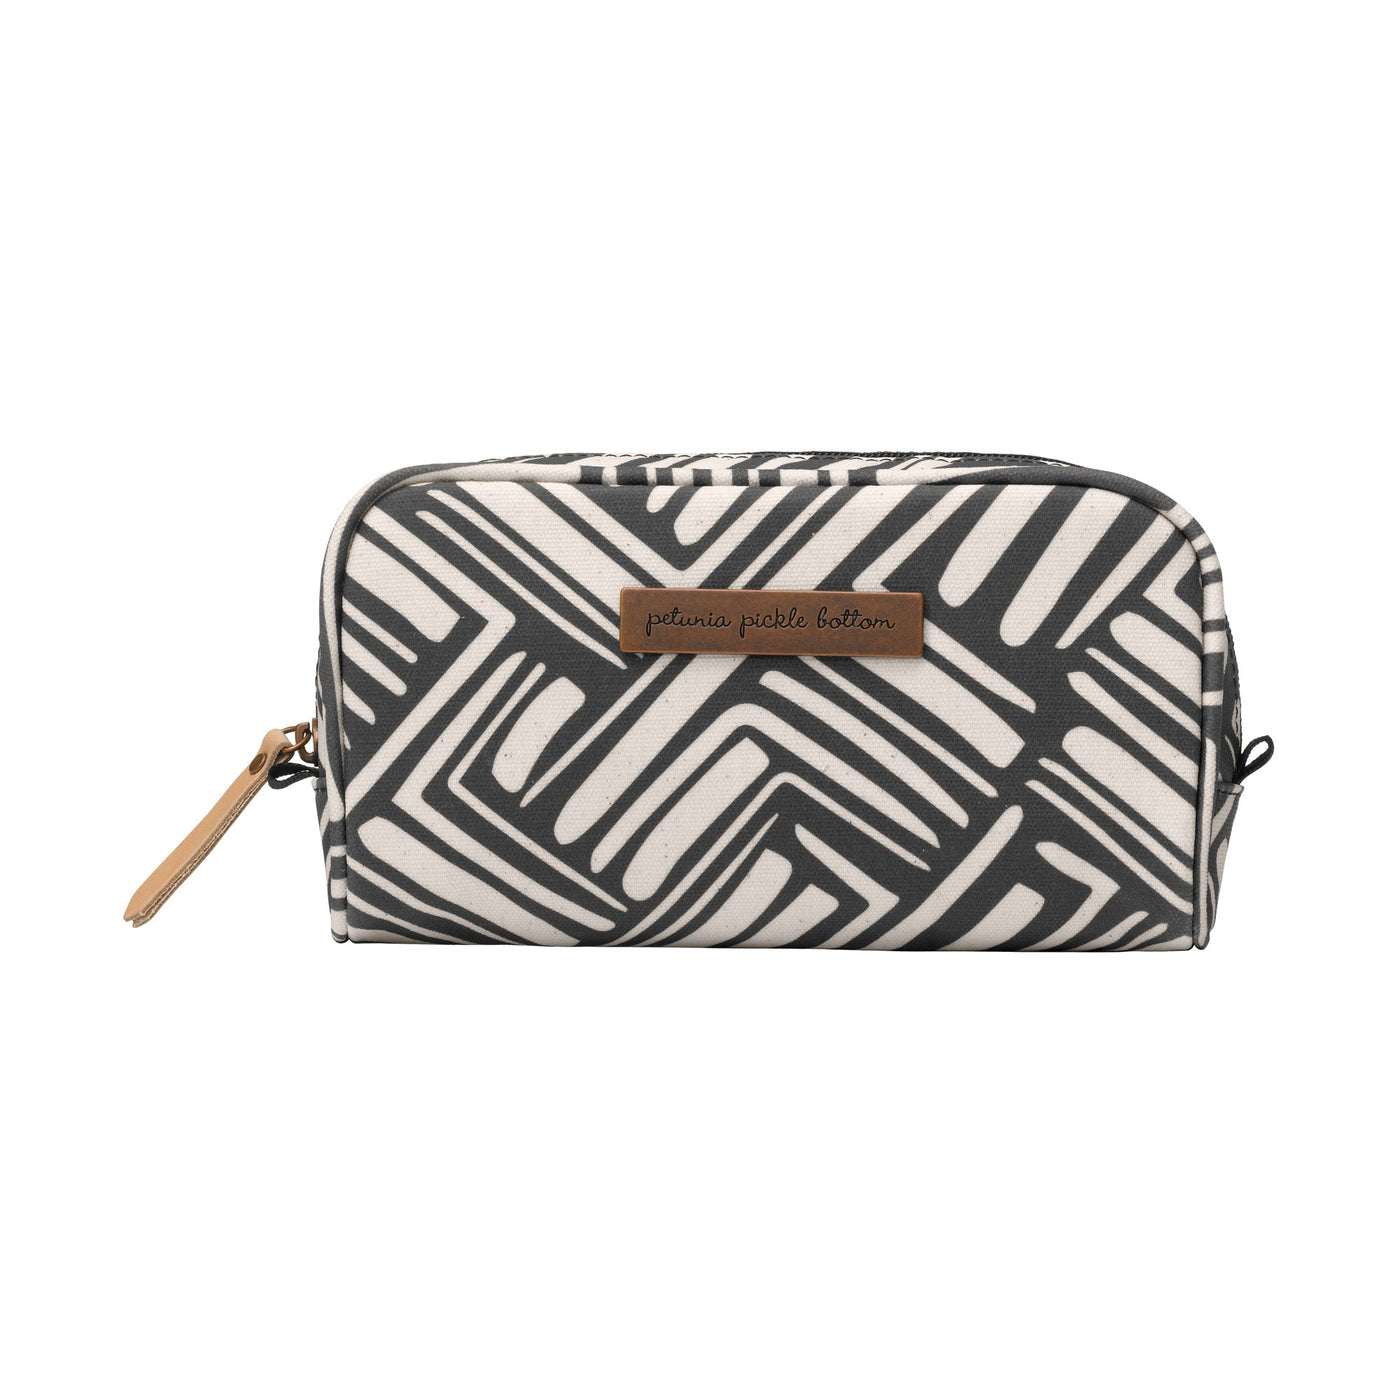 Powder Room Case in Brushes-Makeup Cases-Petunia Pickle Bottom